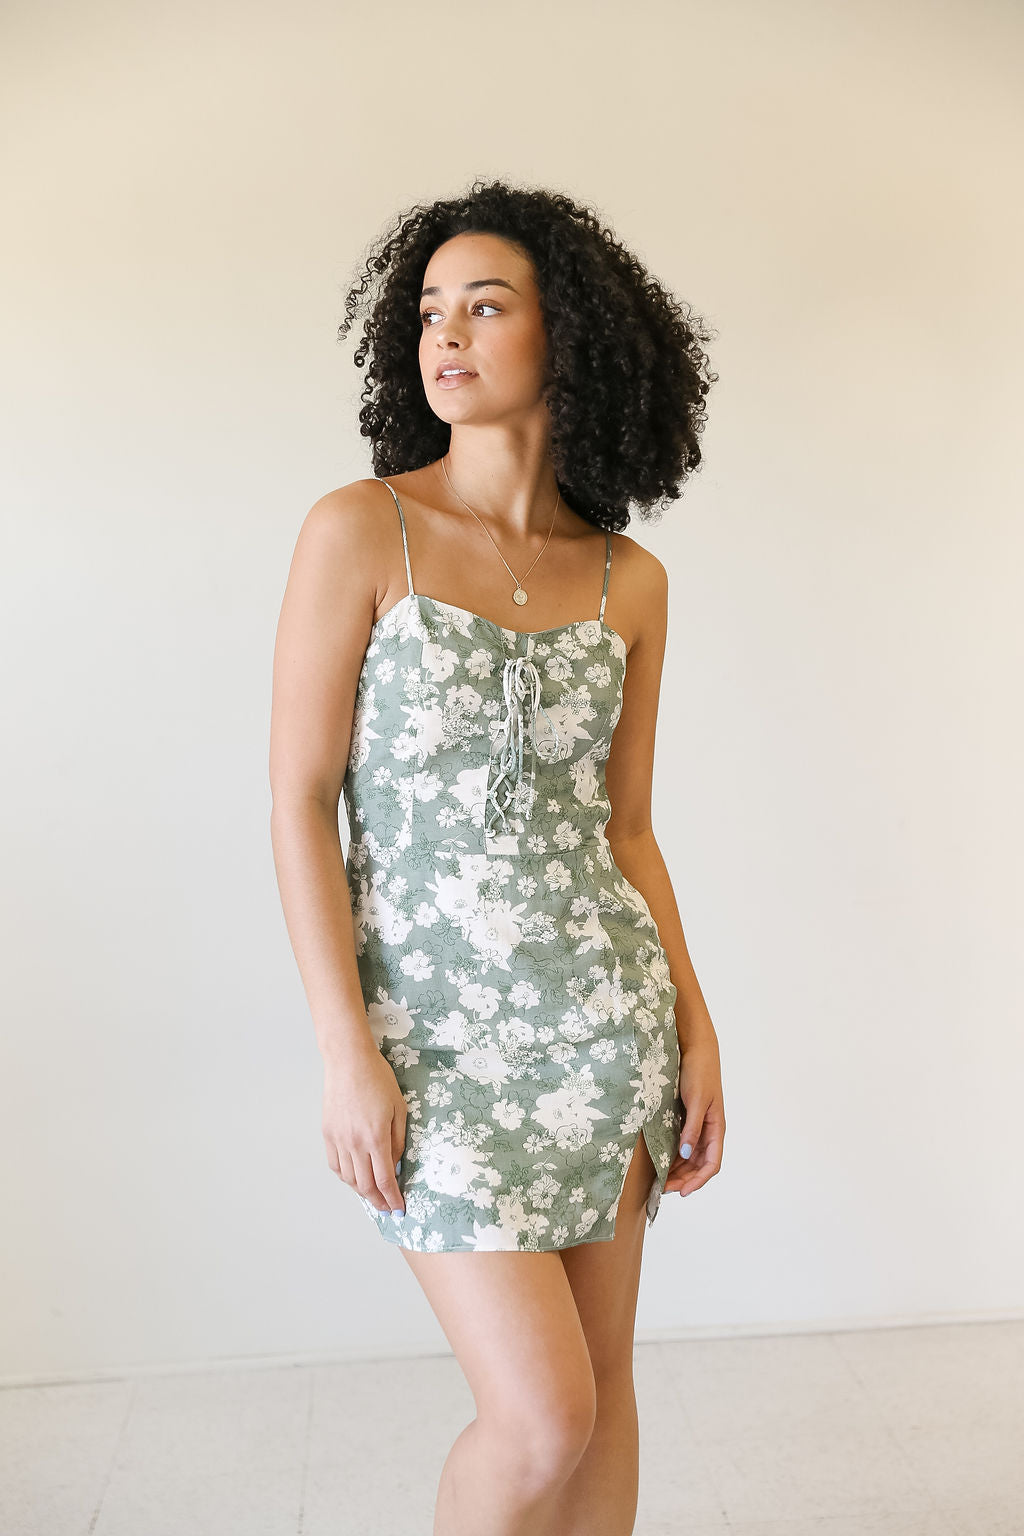 The Wild Floral Cami Dress by For Good